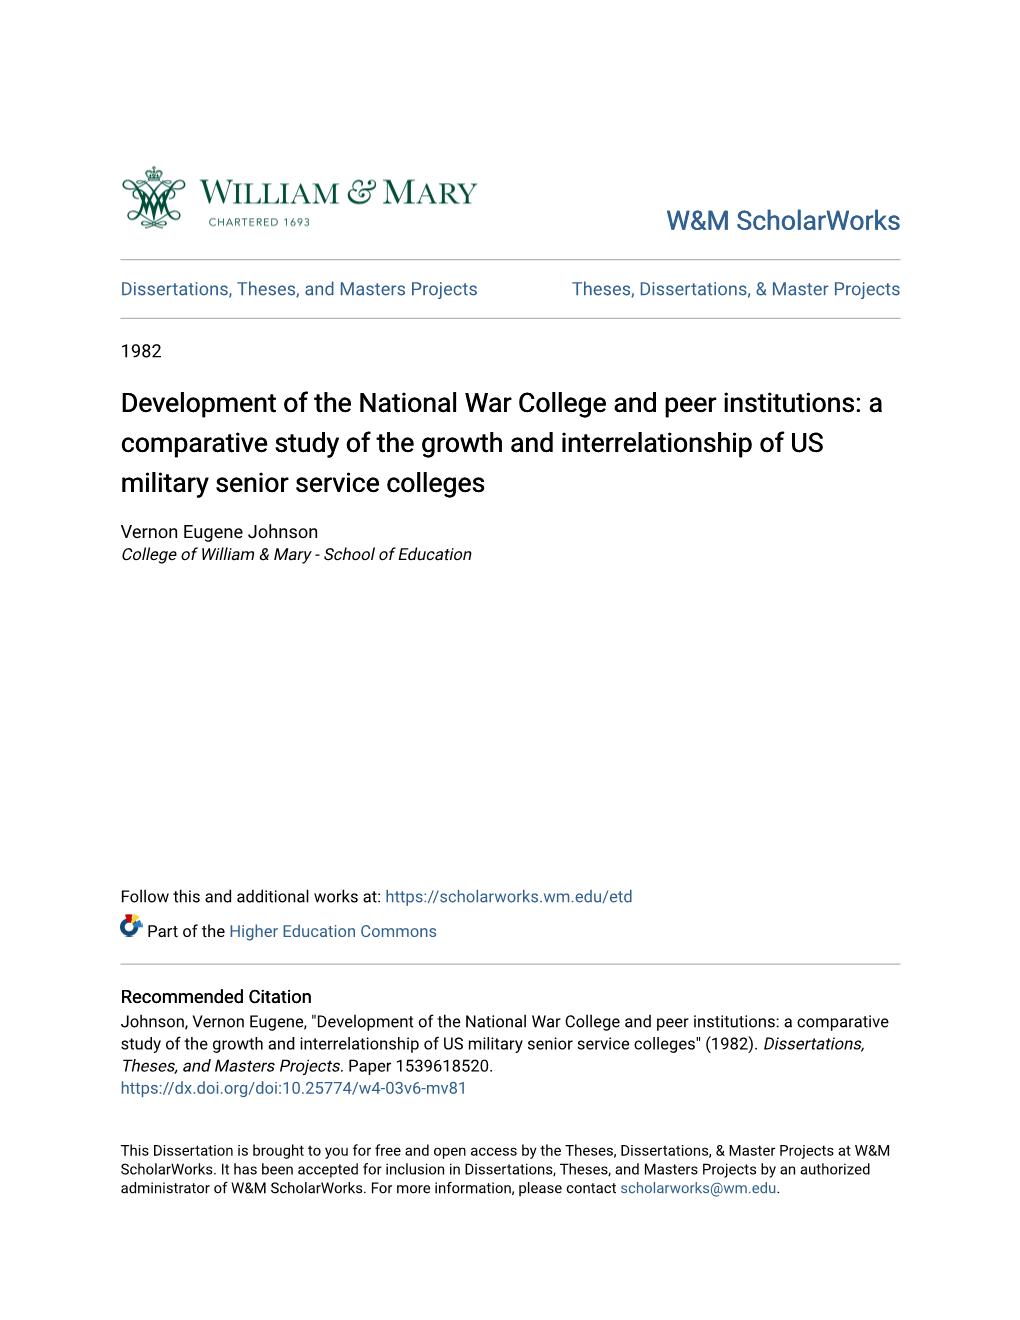 Development of the National War College and Peer Institutions: a Comparative Study of the Growth and Interrelationship of US Military Senior Service Colleges